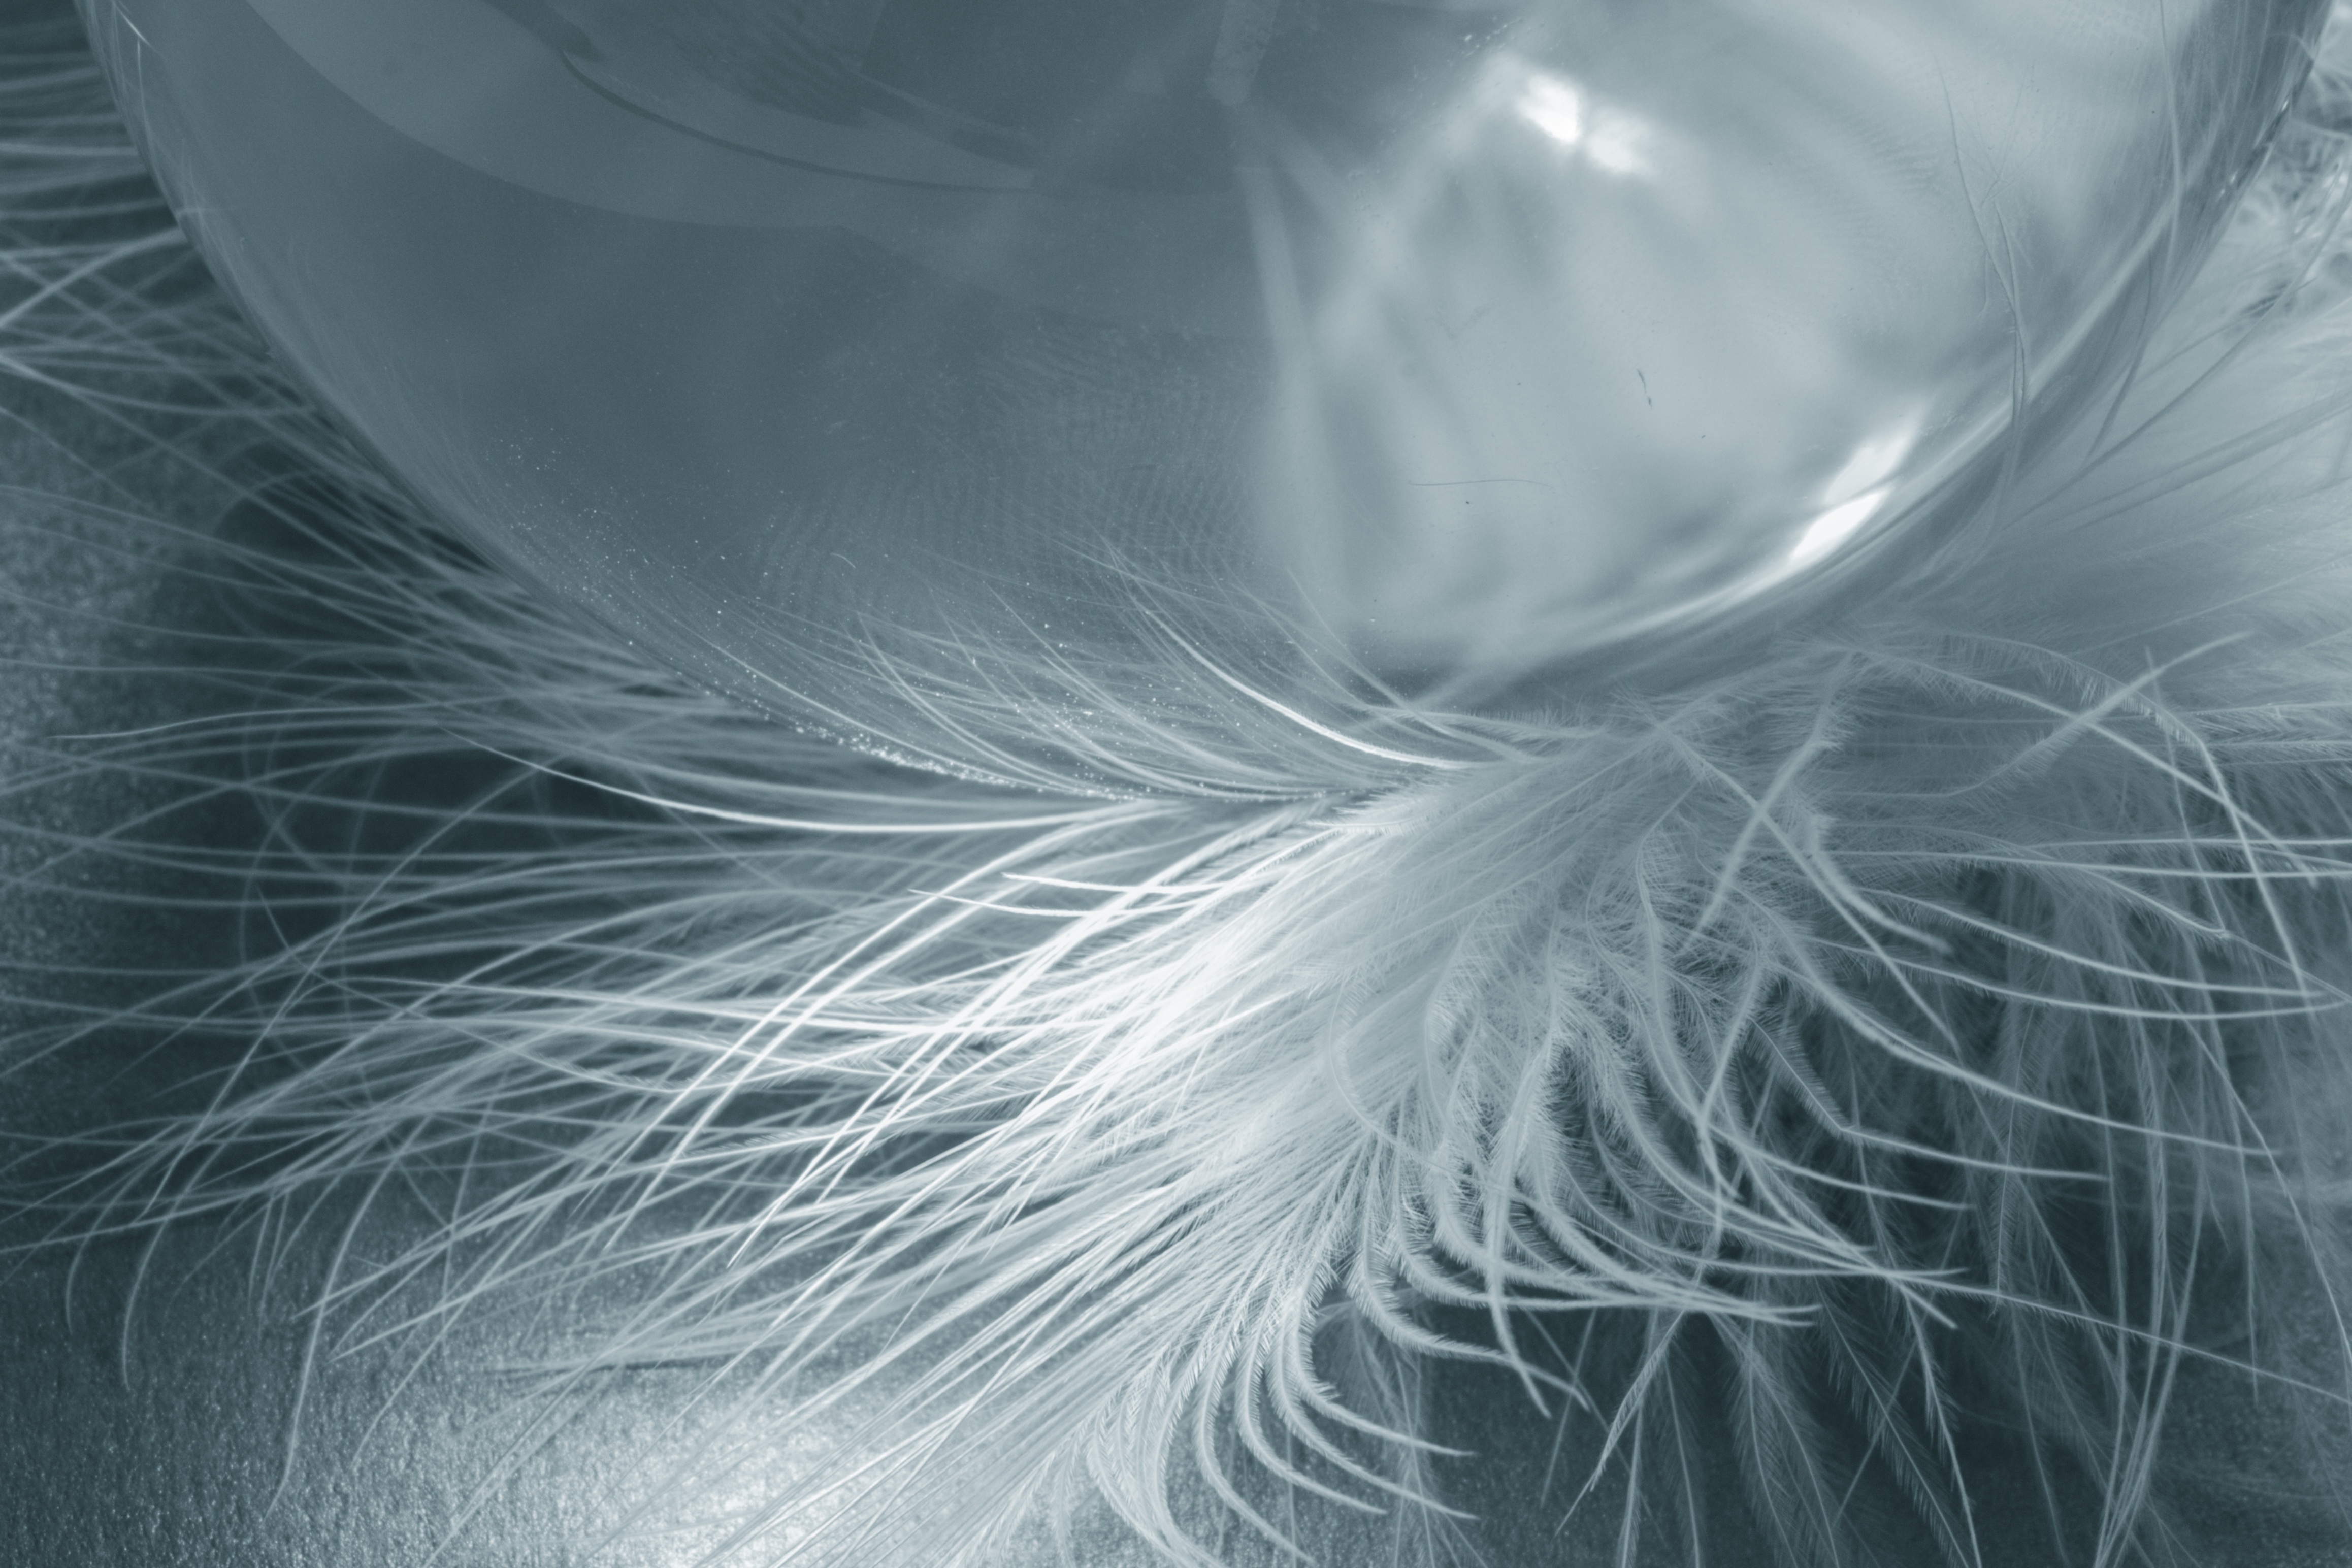 Glass ball n feathers photo